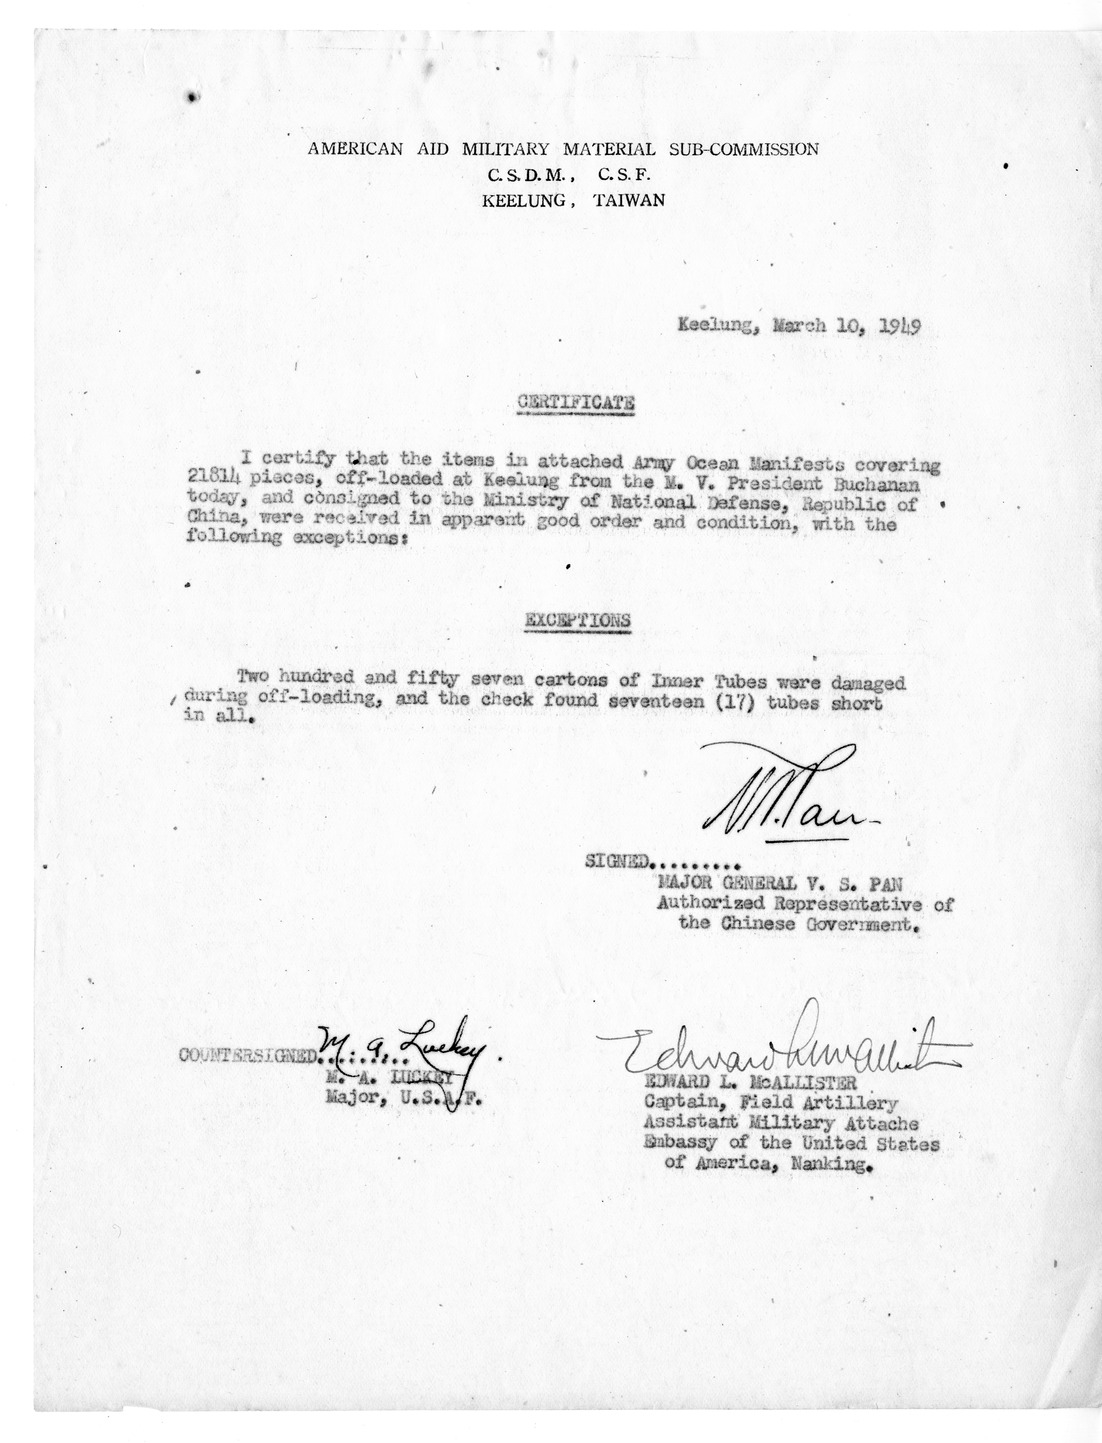 Certificate of Receipt of Materials from Major General V. S. Pan